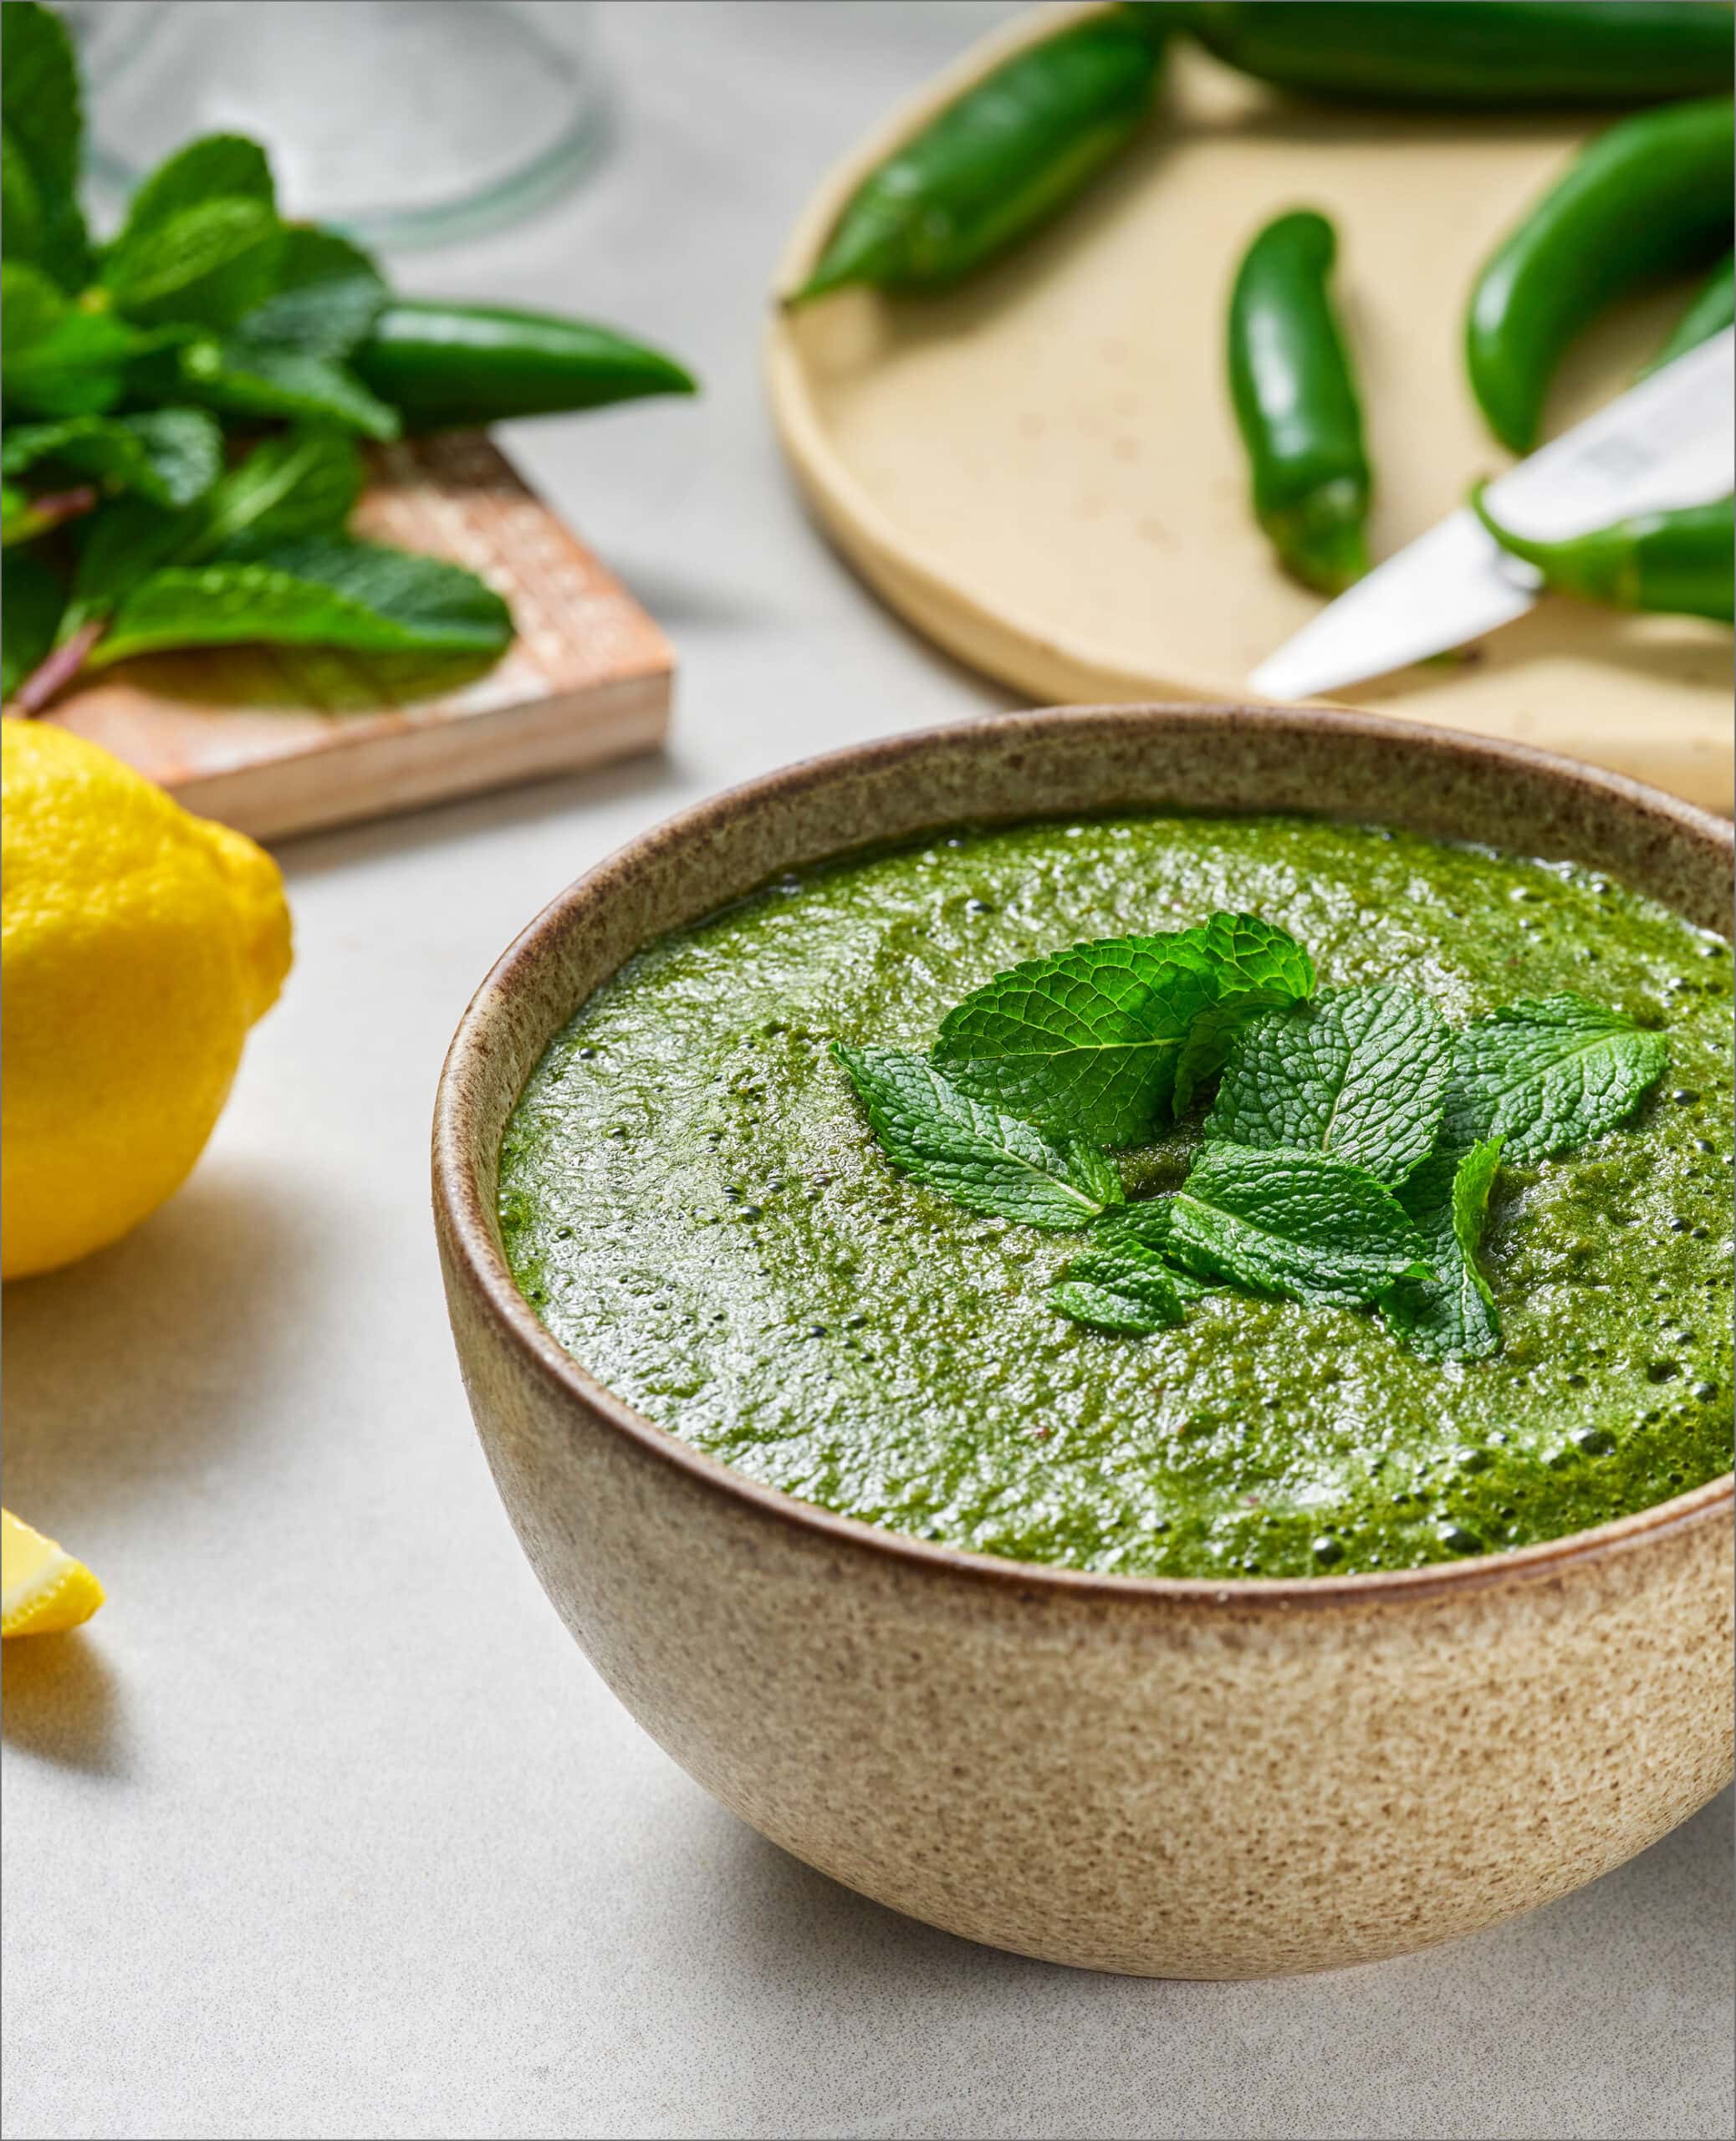 A brown ceramic bowl fill with a green sauce topped with fresh mint leaves.